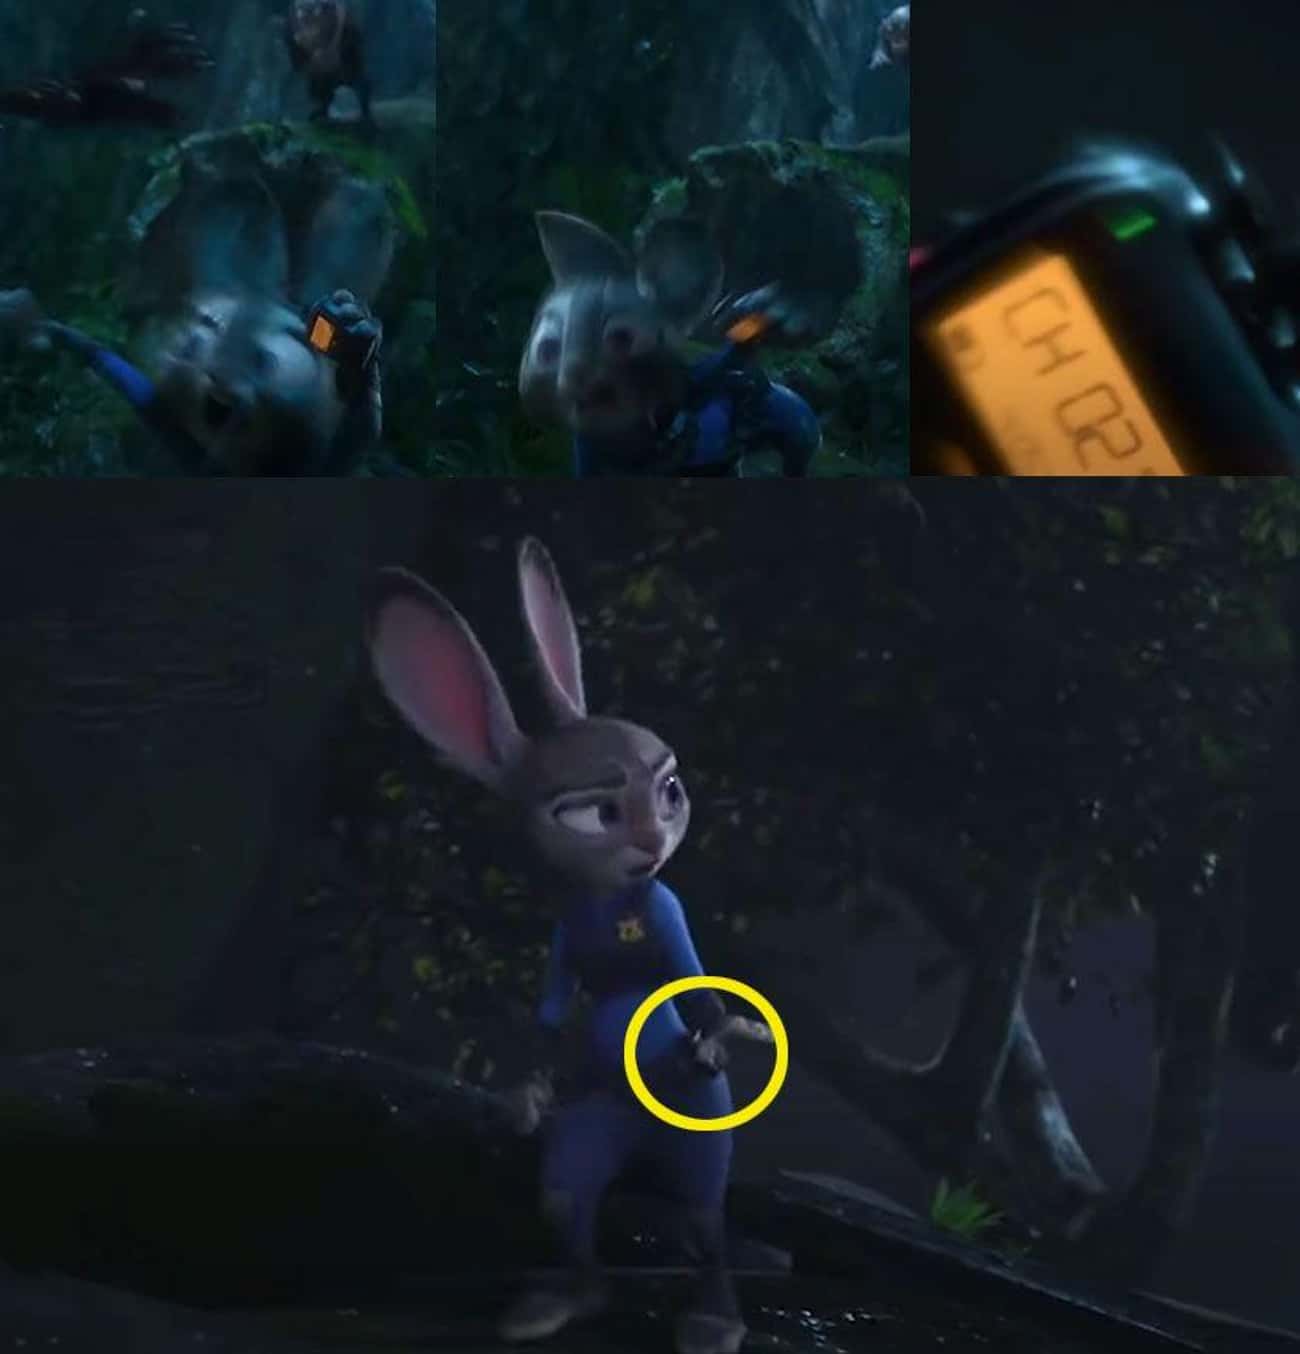 Judy's Walkie-Talkie Magically Returns To Her After It Falls Off A Cliff